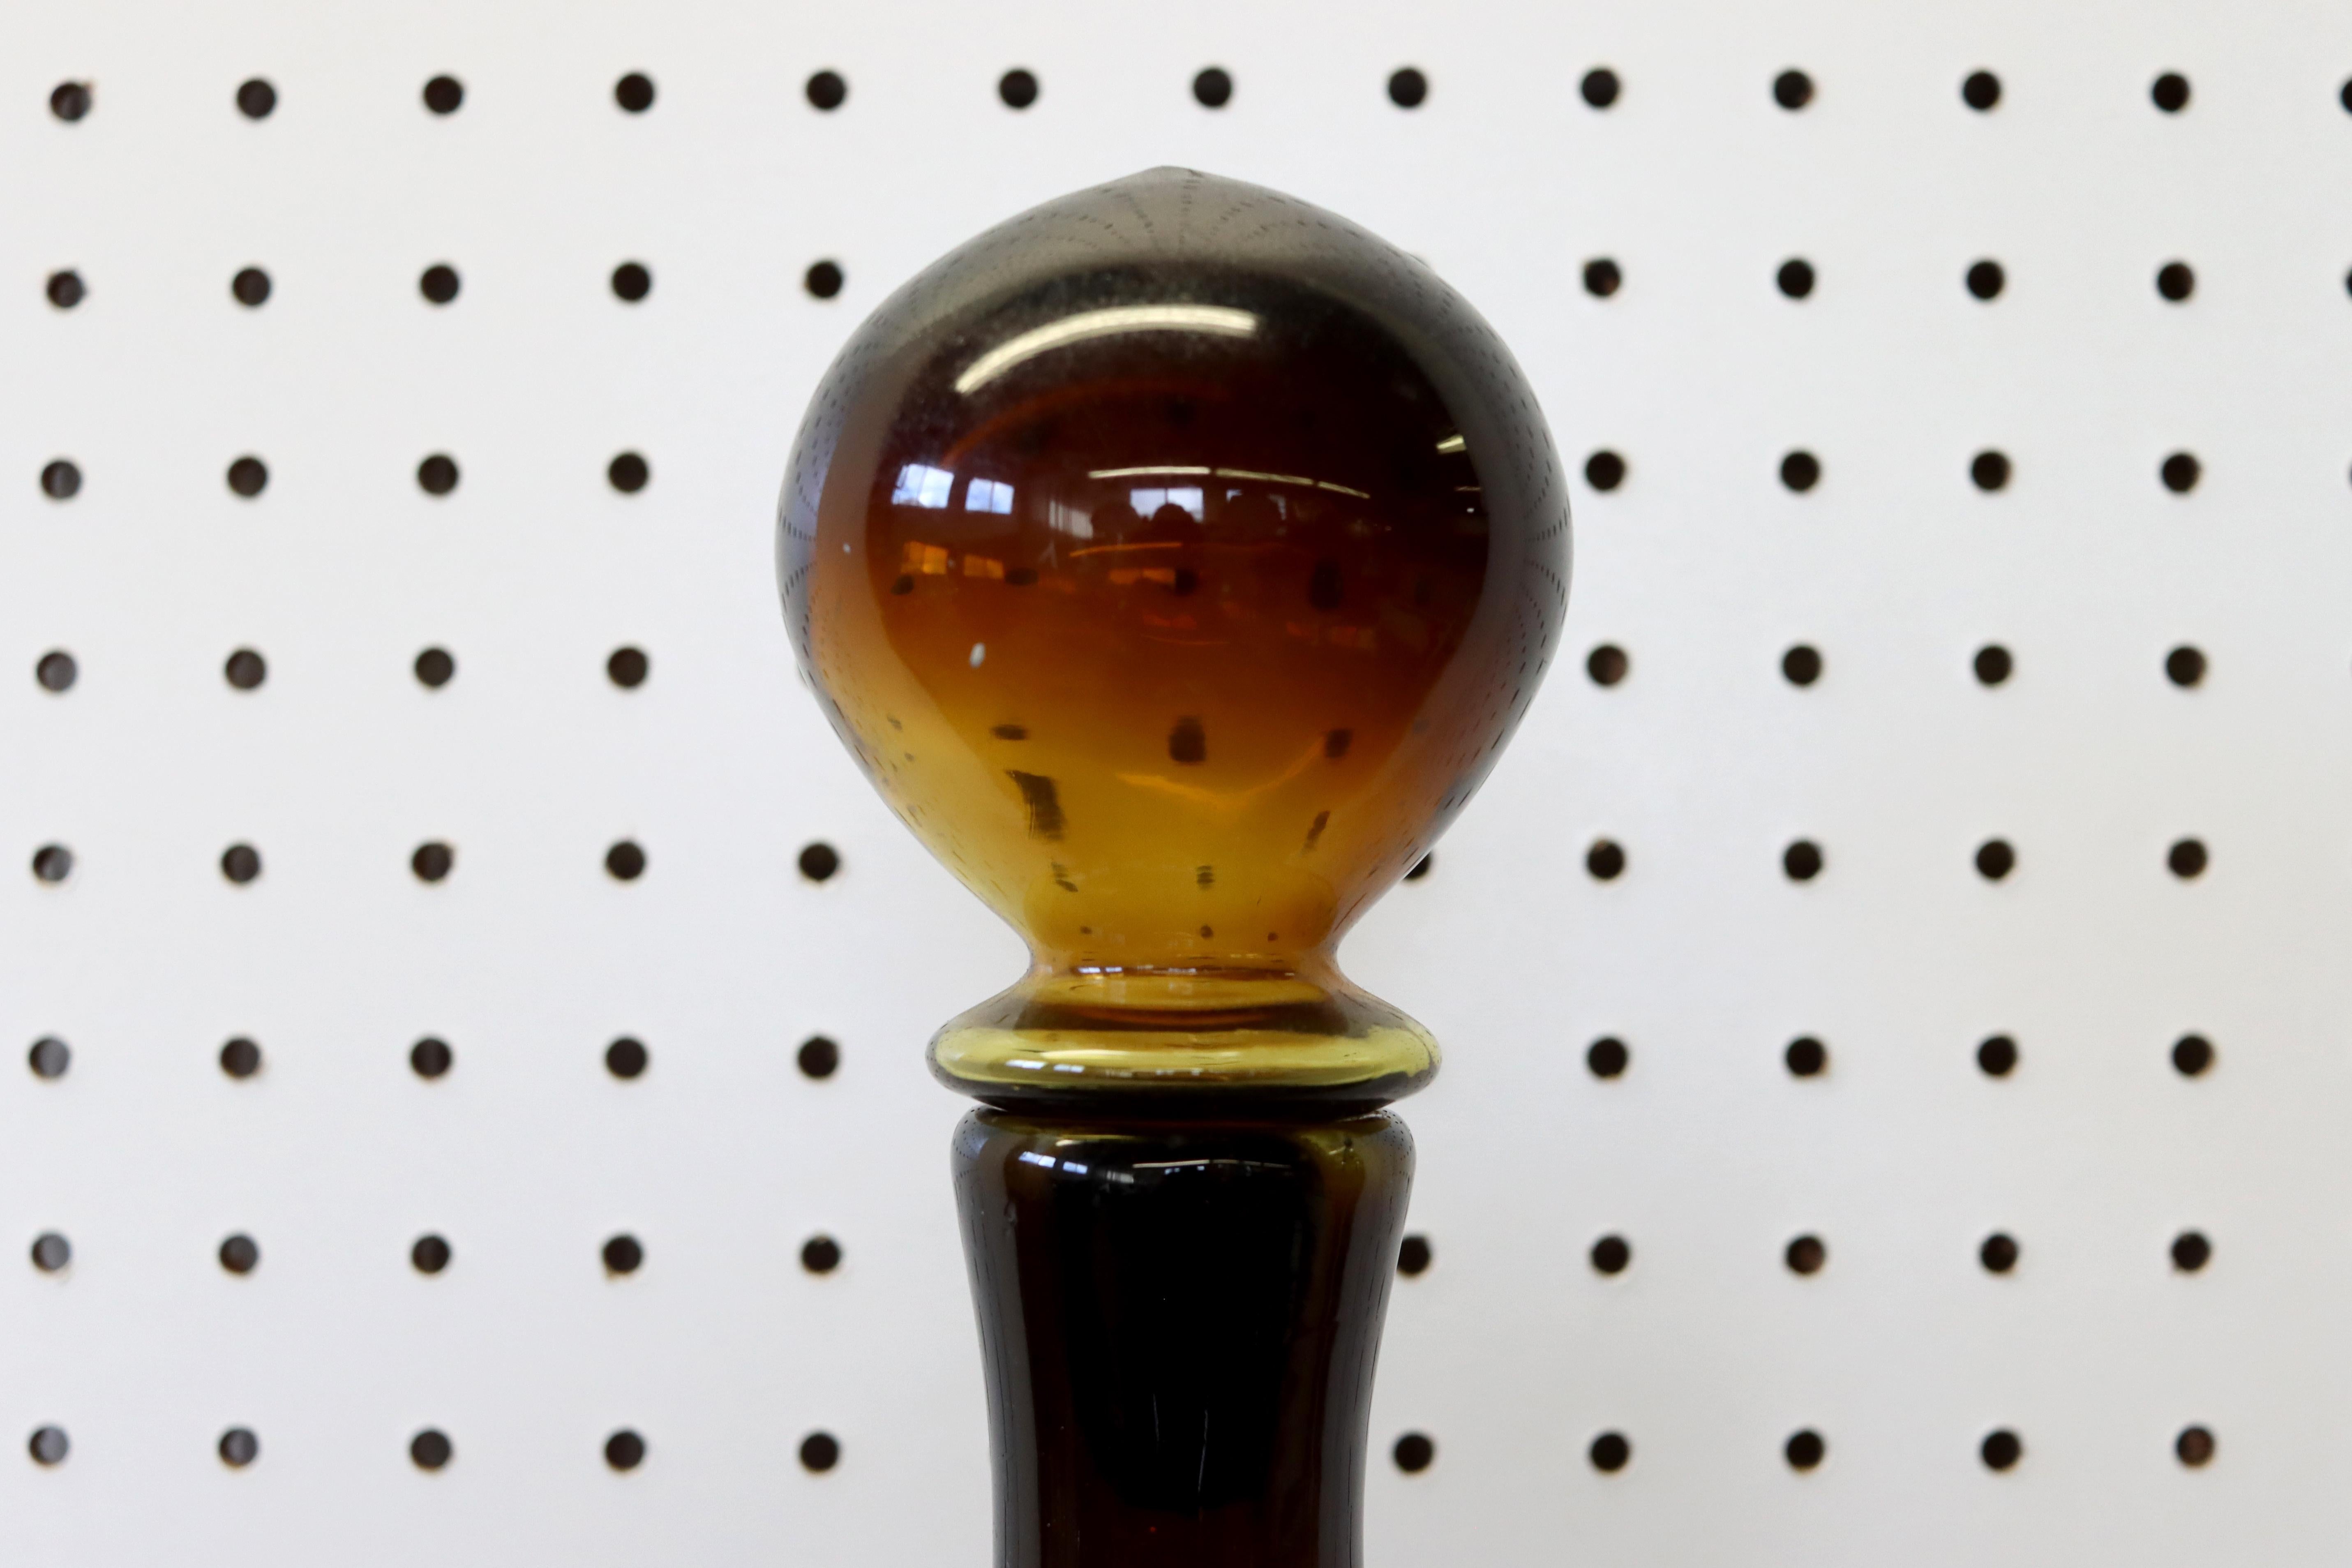 A burnt-honey glass decanter by Tom Connally for Greenwhich Flint-Craft. Made circa the late 1960s. Includes original stopper. The decanter is in excellent condition with no chips, cracks, or clouding. Measures 25 1/4” tall x 3 7/8” diameter.